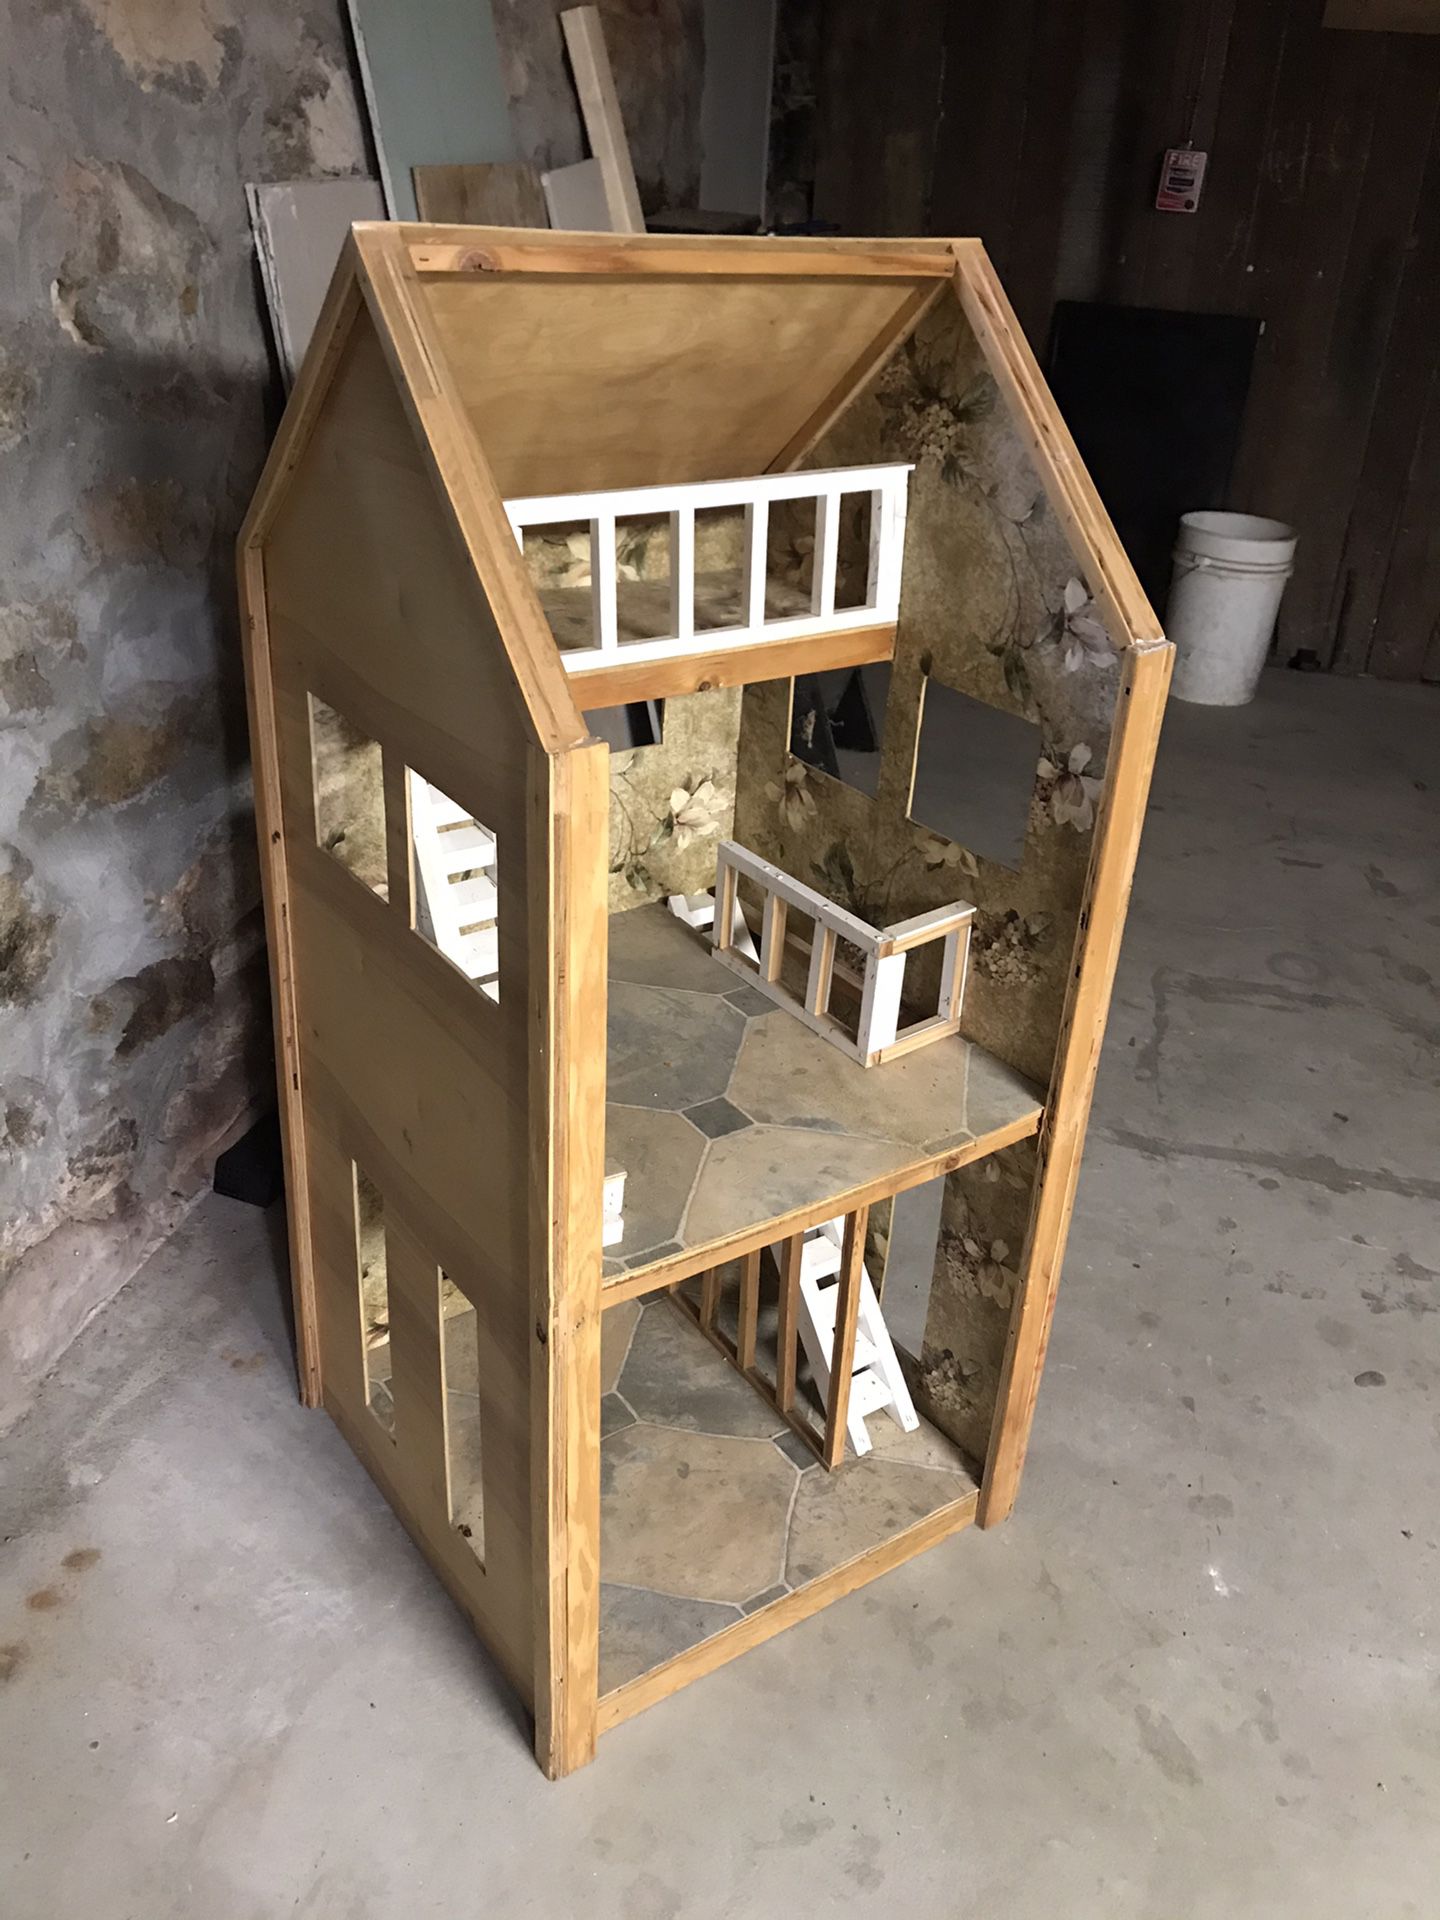 Home made doll house